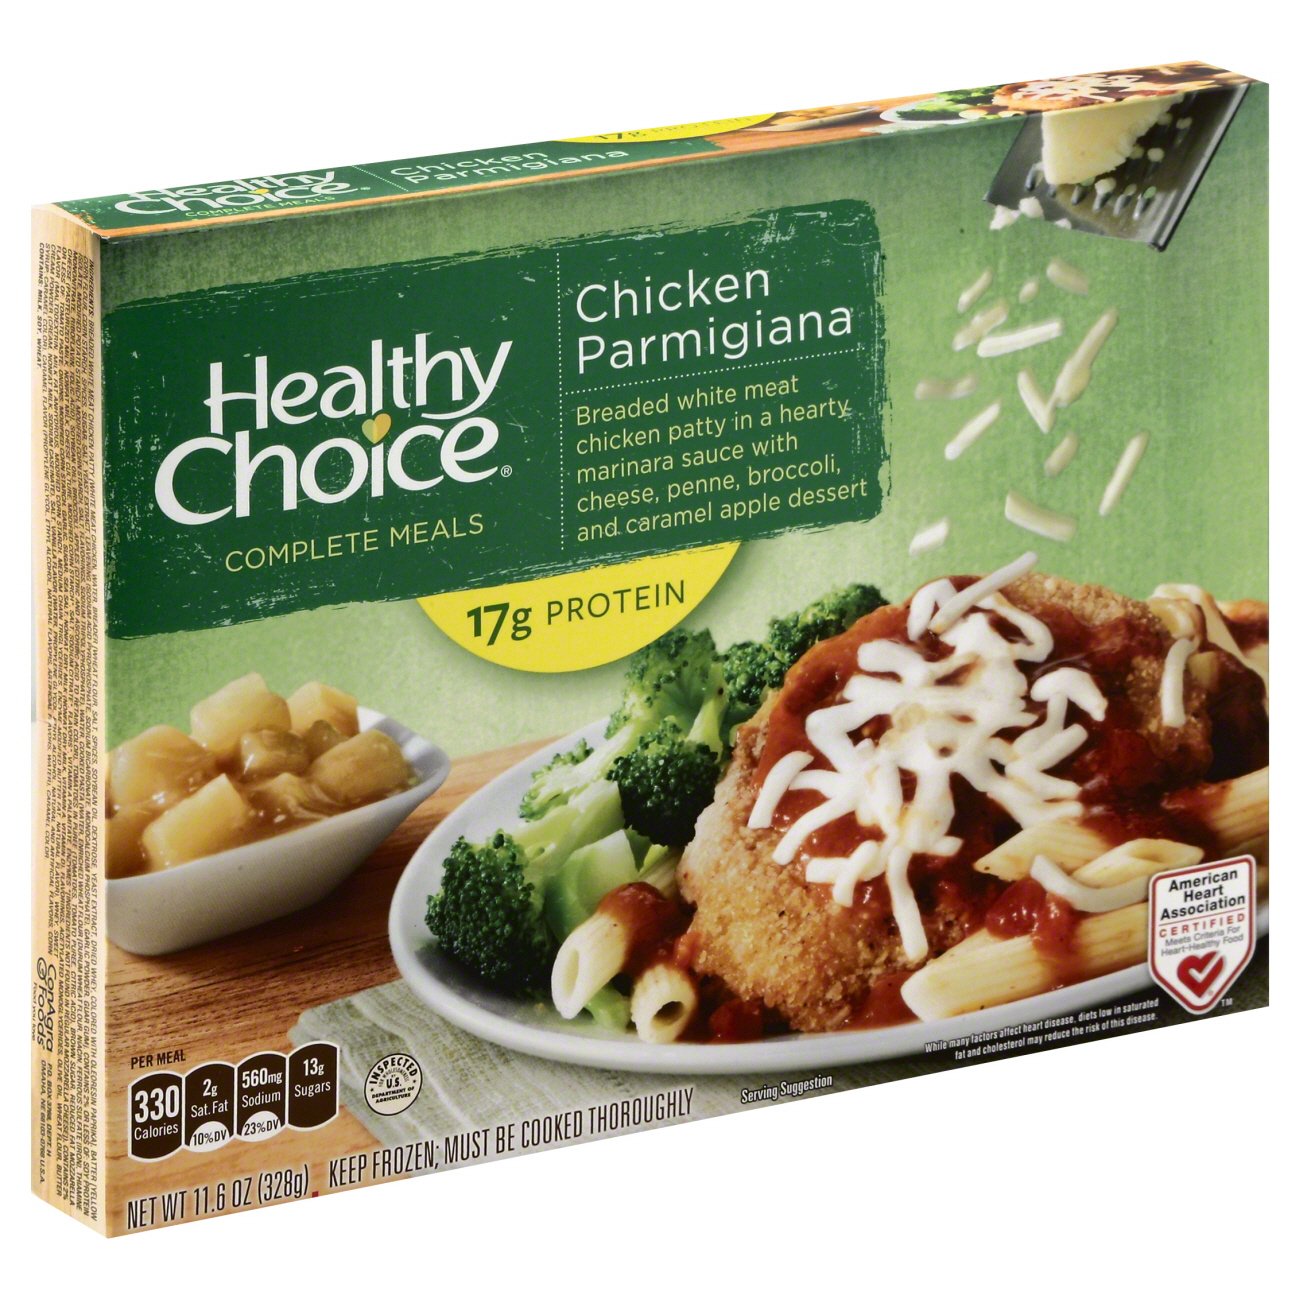 Healthy Choice Complete Meals Chicken Parmigiana - Shop Entrees & Sides